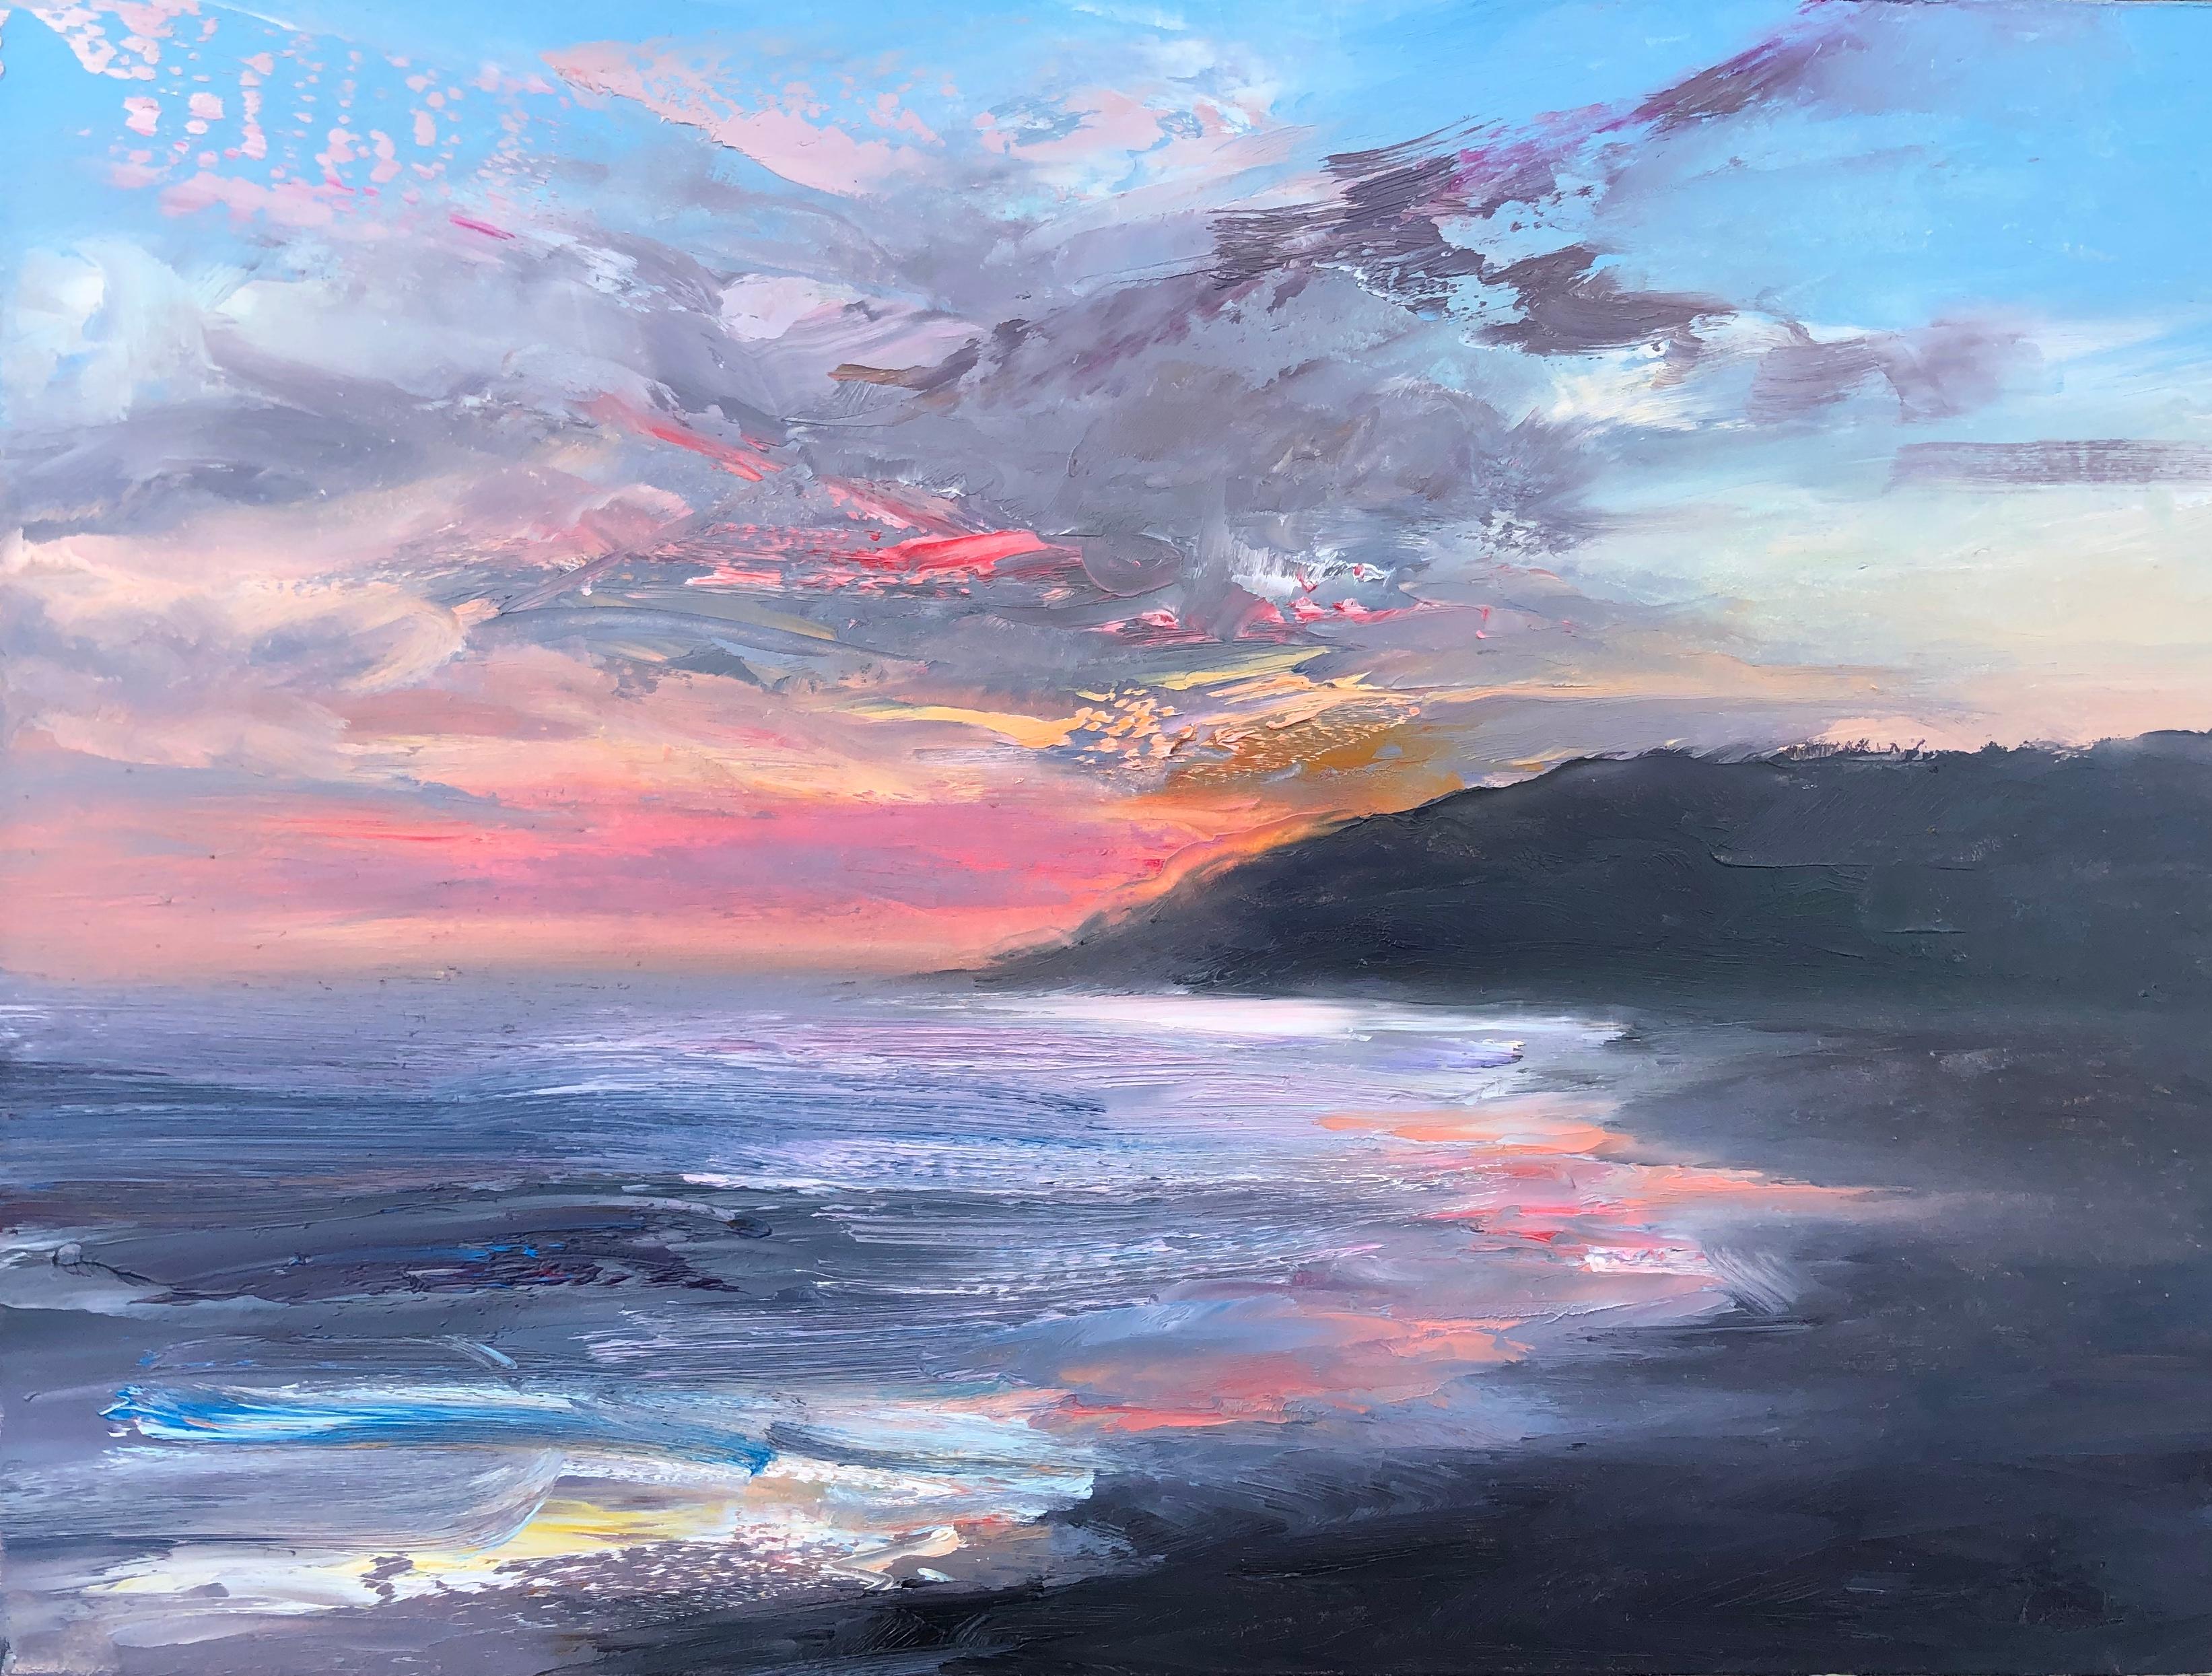 Whitney Knapp Landscape Painting - "Atlantic Evening" oil painting of pink sunset and clouds over the ocean shore